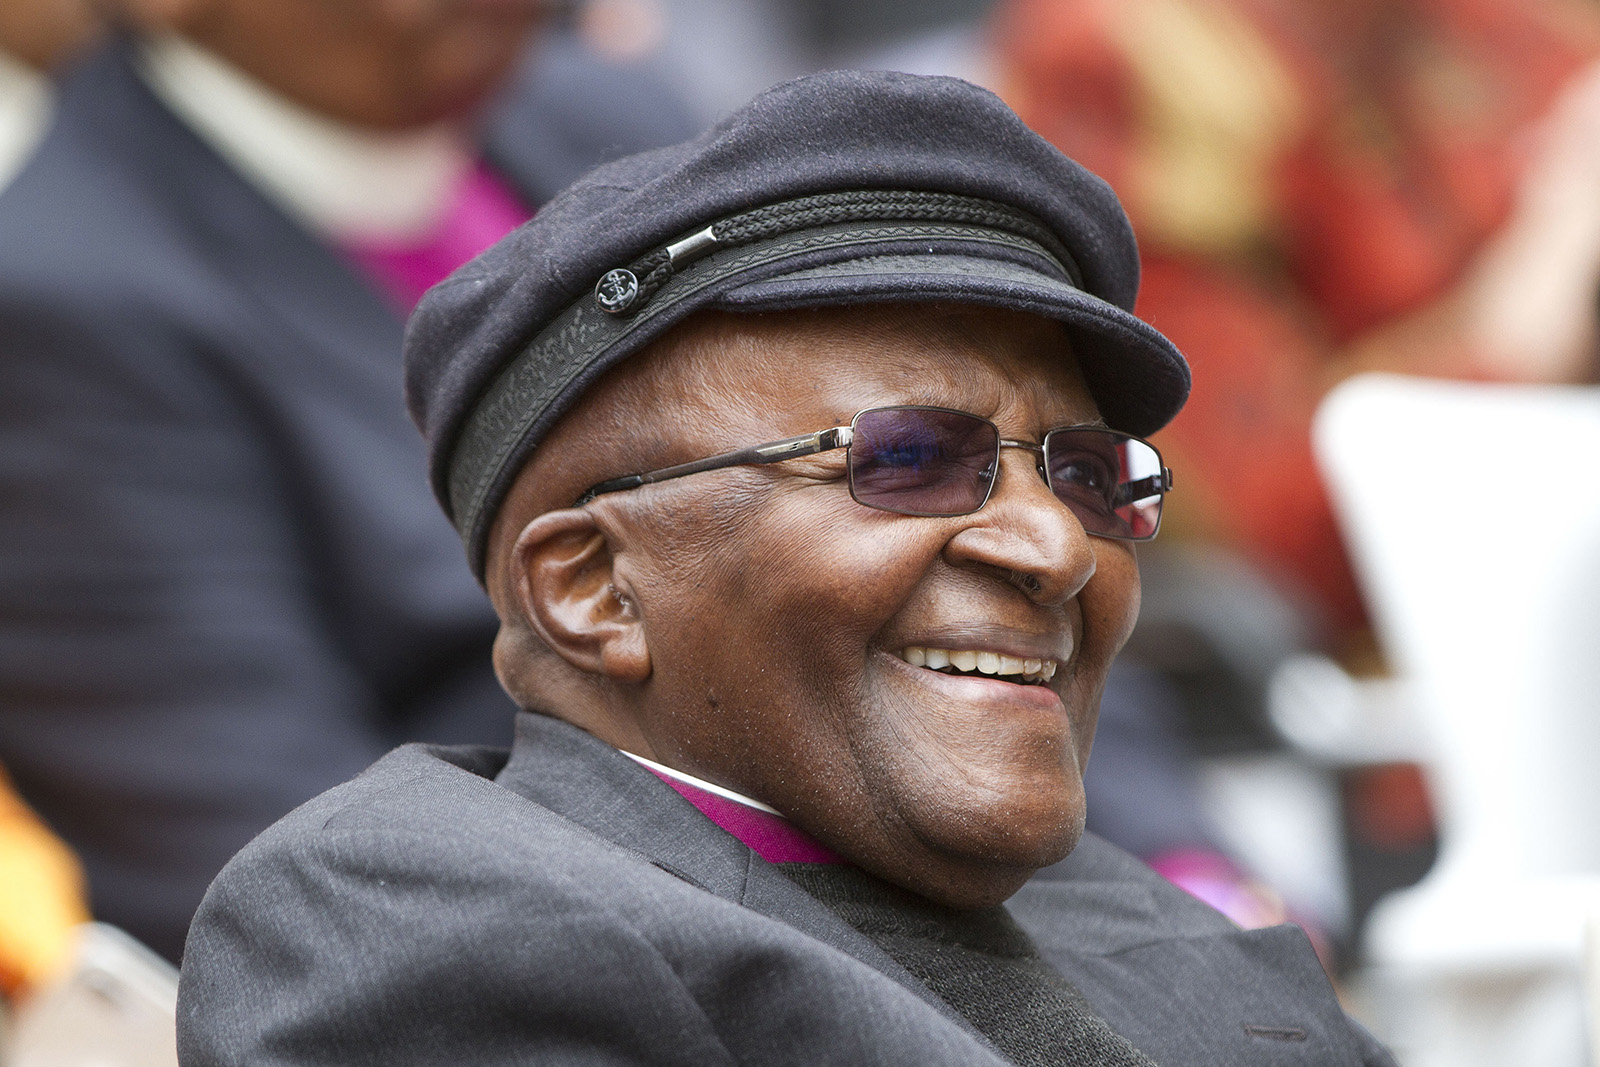 Anglican Archbishop Emeritus Desmond Tutu smiles as he celebrates his 86th birthday in Cape Town, South Africa, on Oct. 7, 2017. (AP Photo/Mark Wessels)